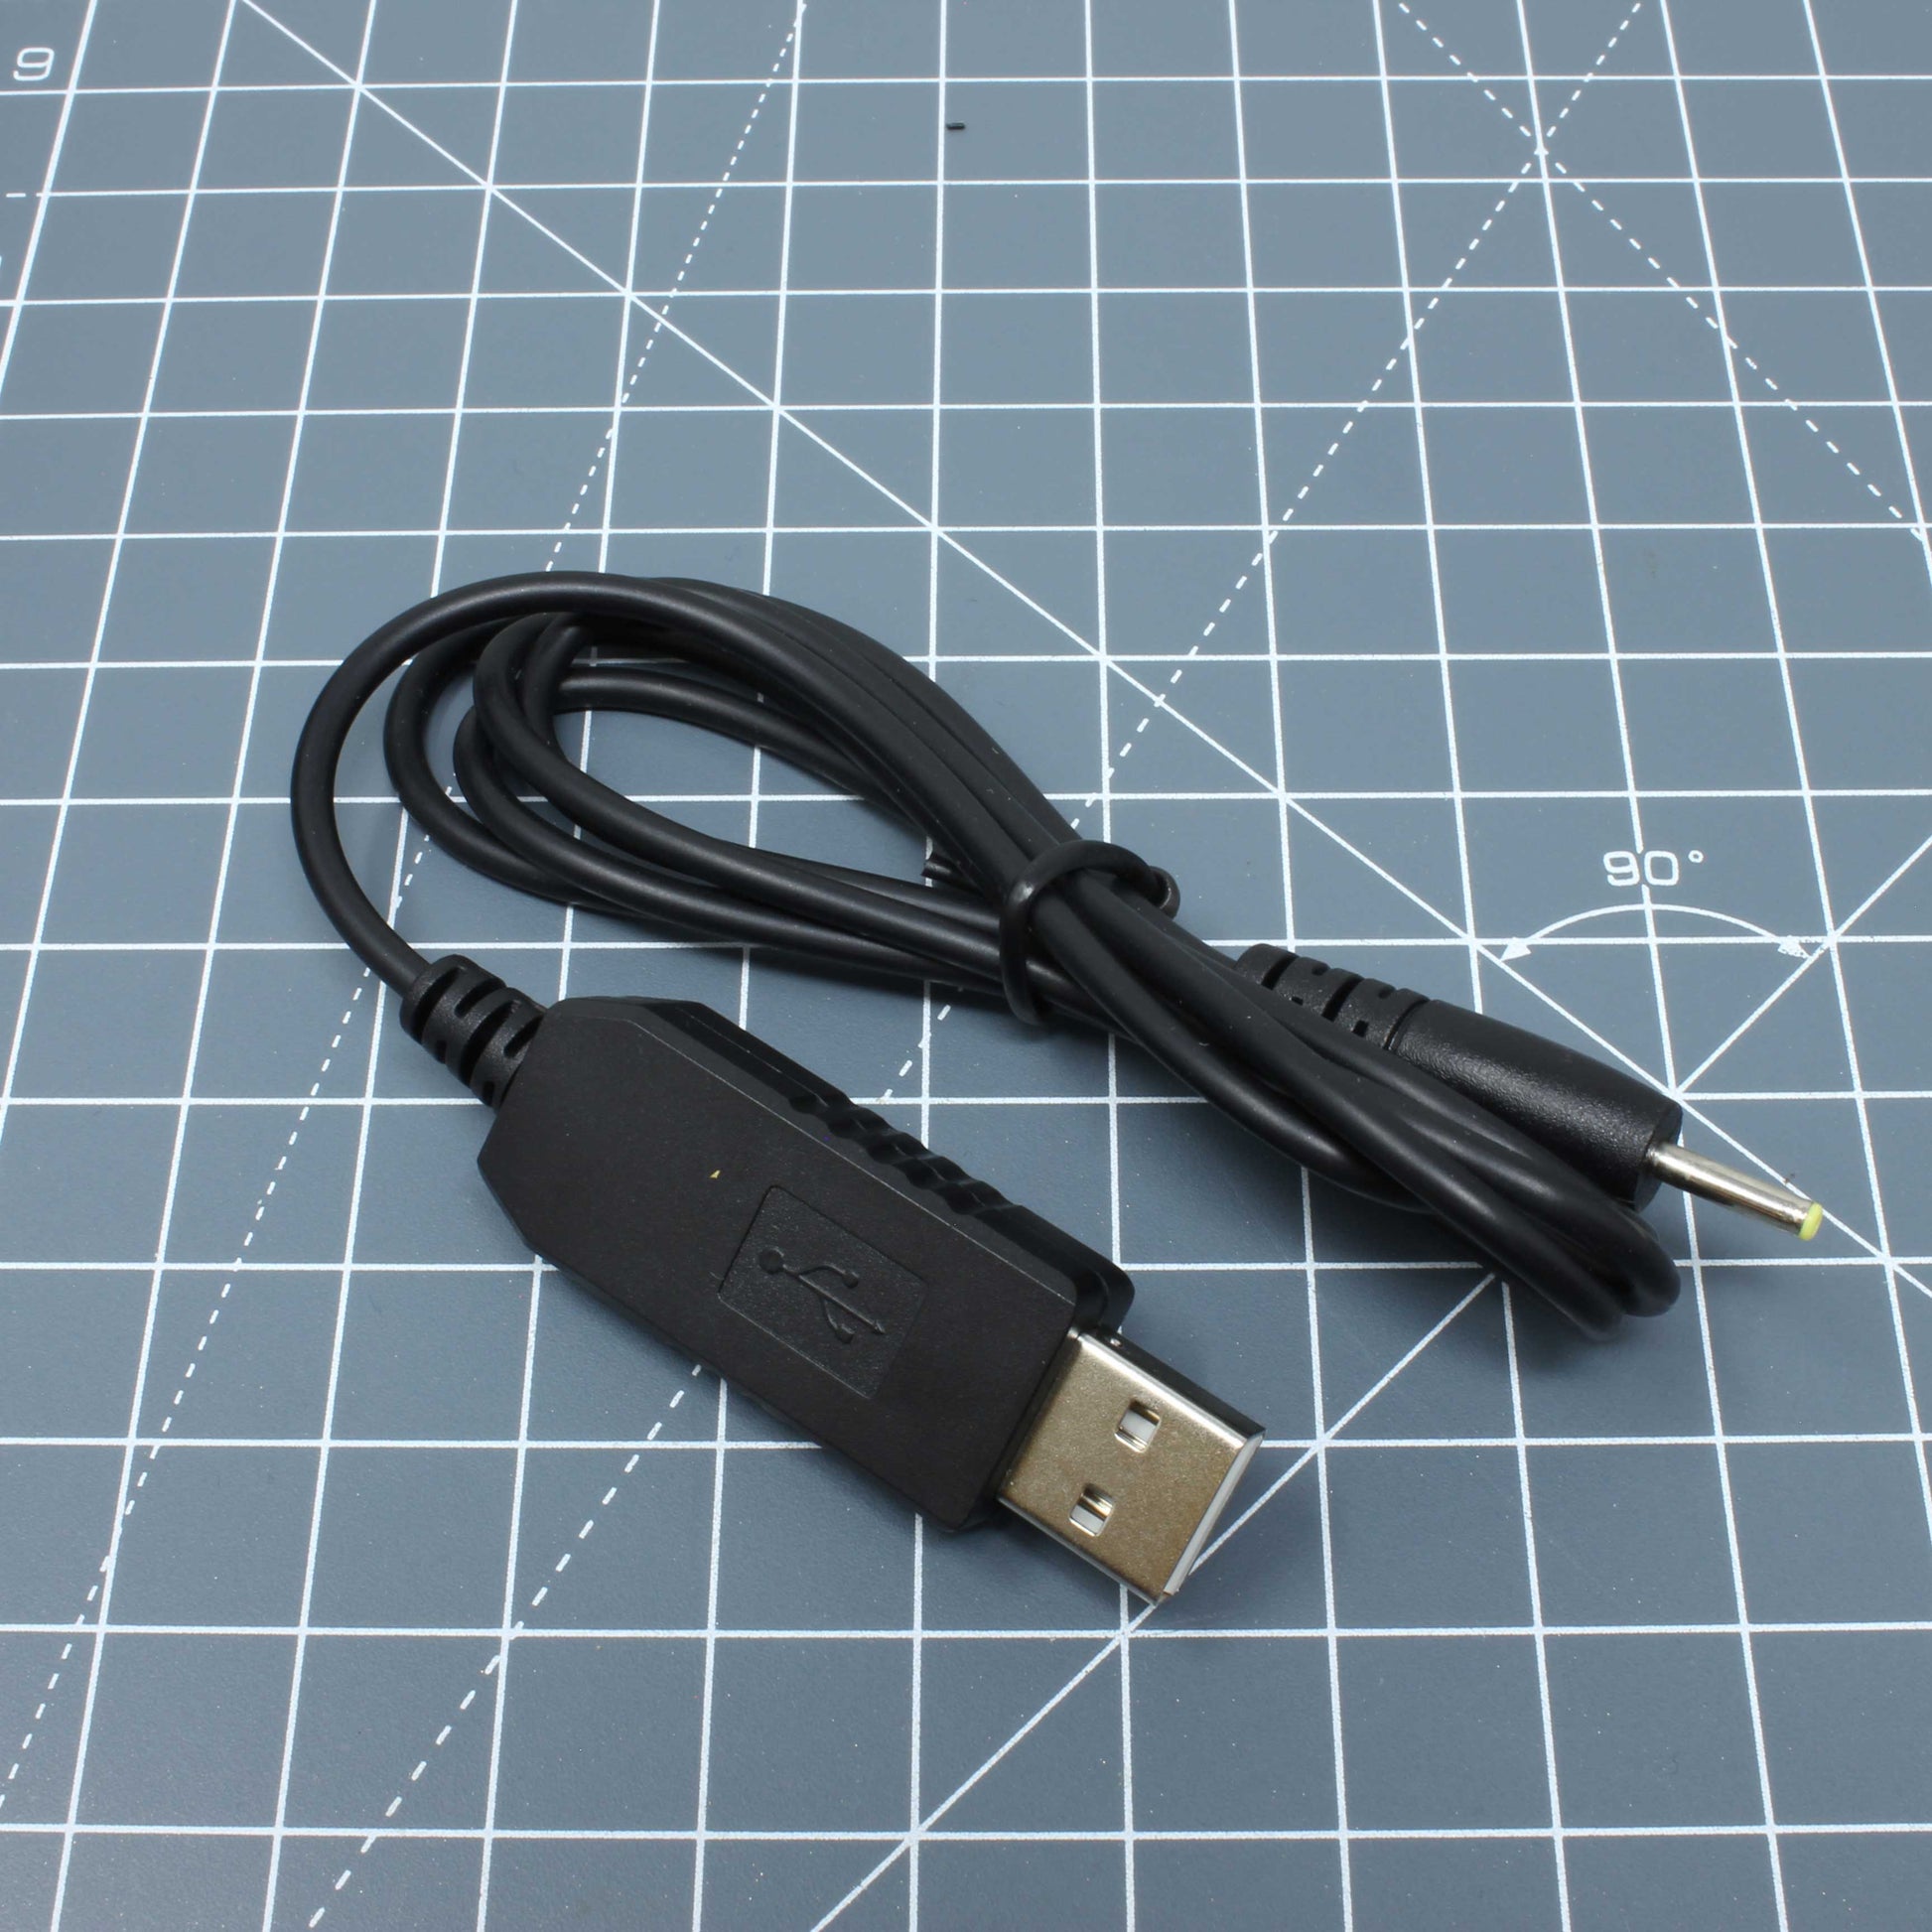 A Labfifteenco black USB power cable on a piece of paper for Game Boy Color/Pocket/Light - Parts - 3.3V USB Cable.